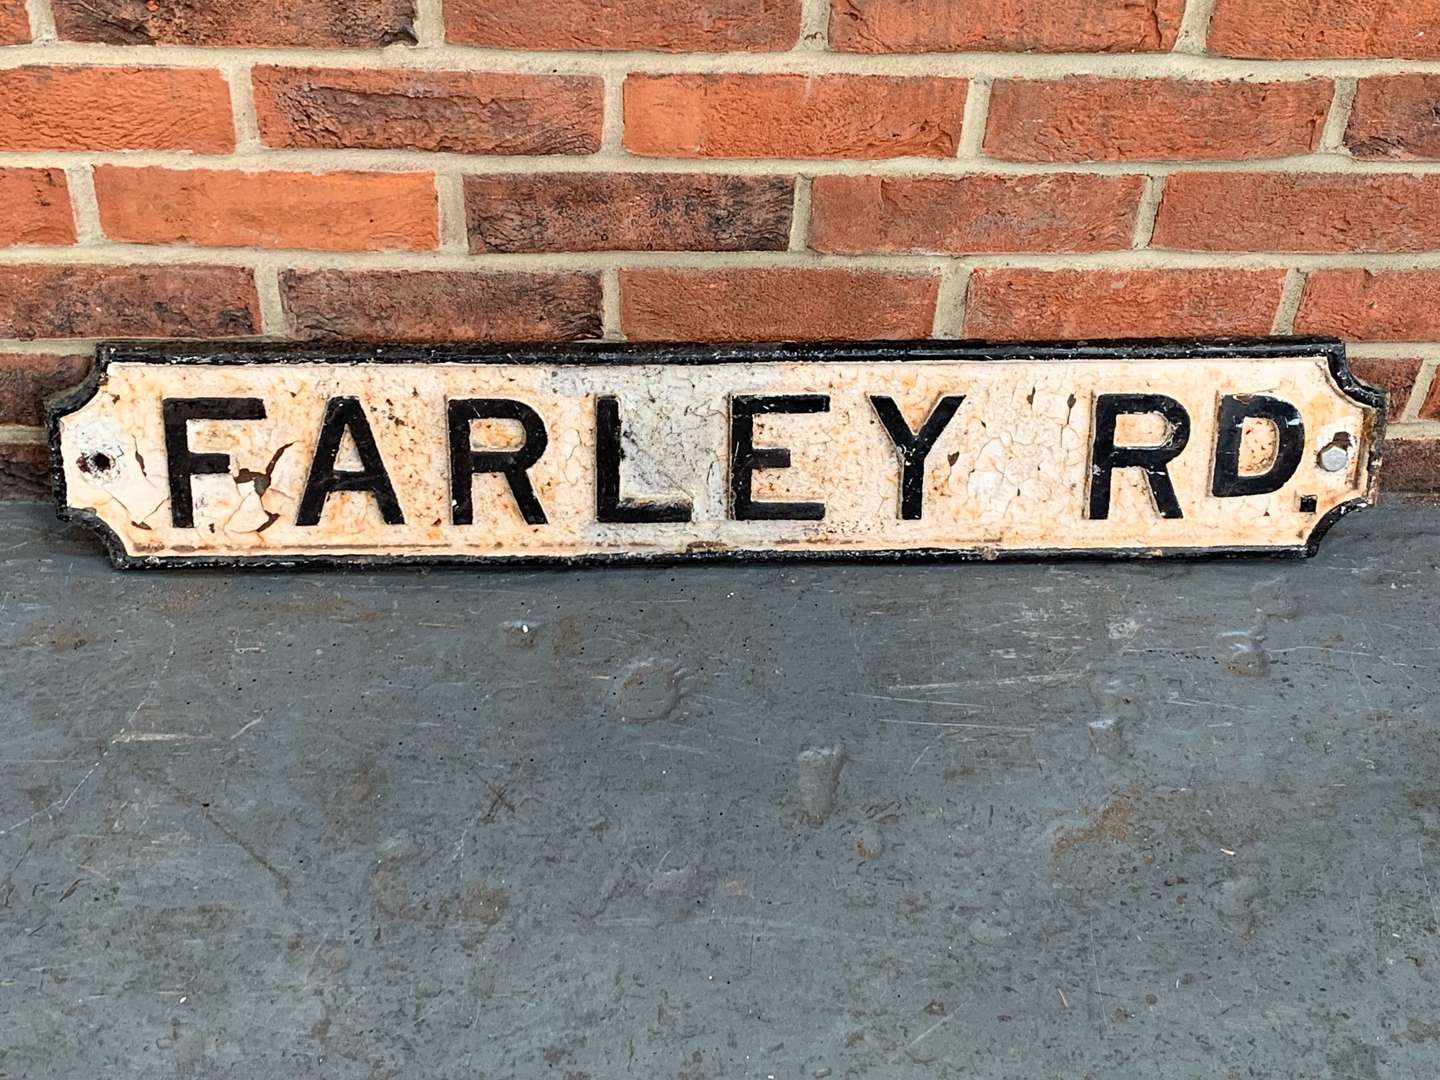 <p>Cast Iron Road Sign “ Farley Rd"</p>